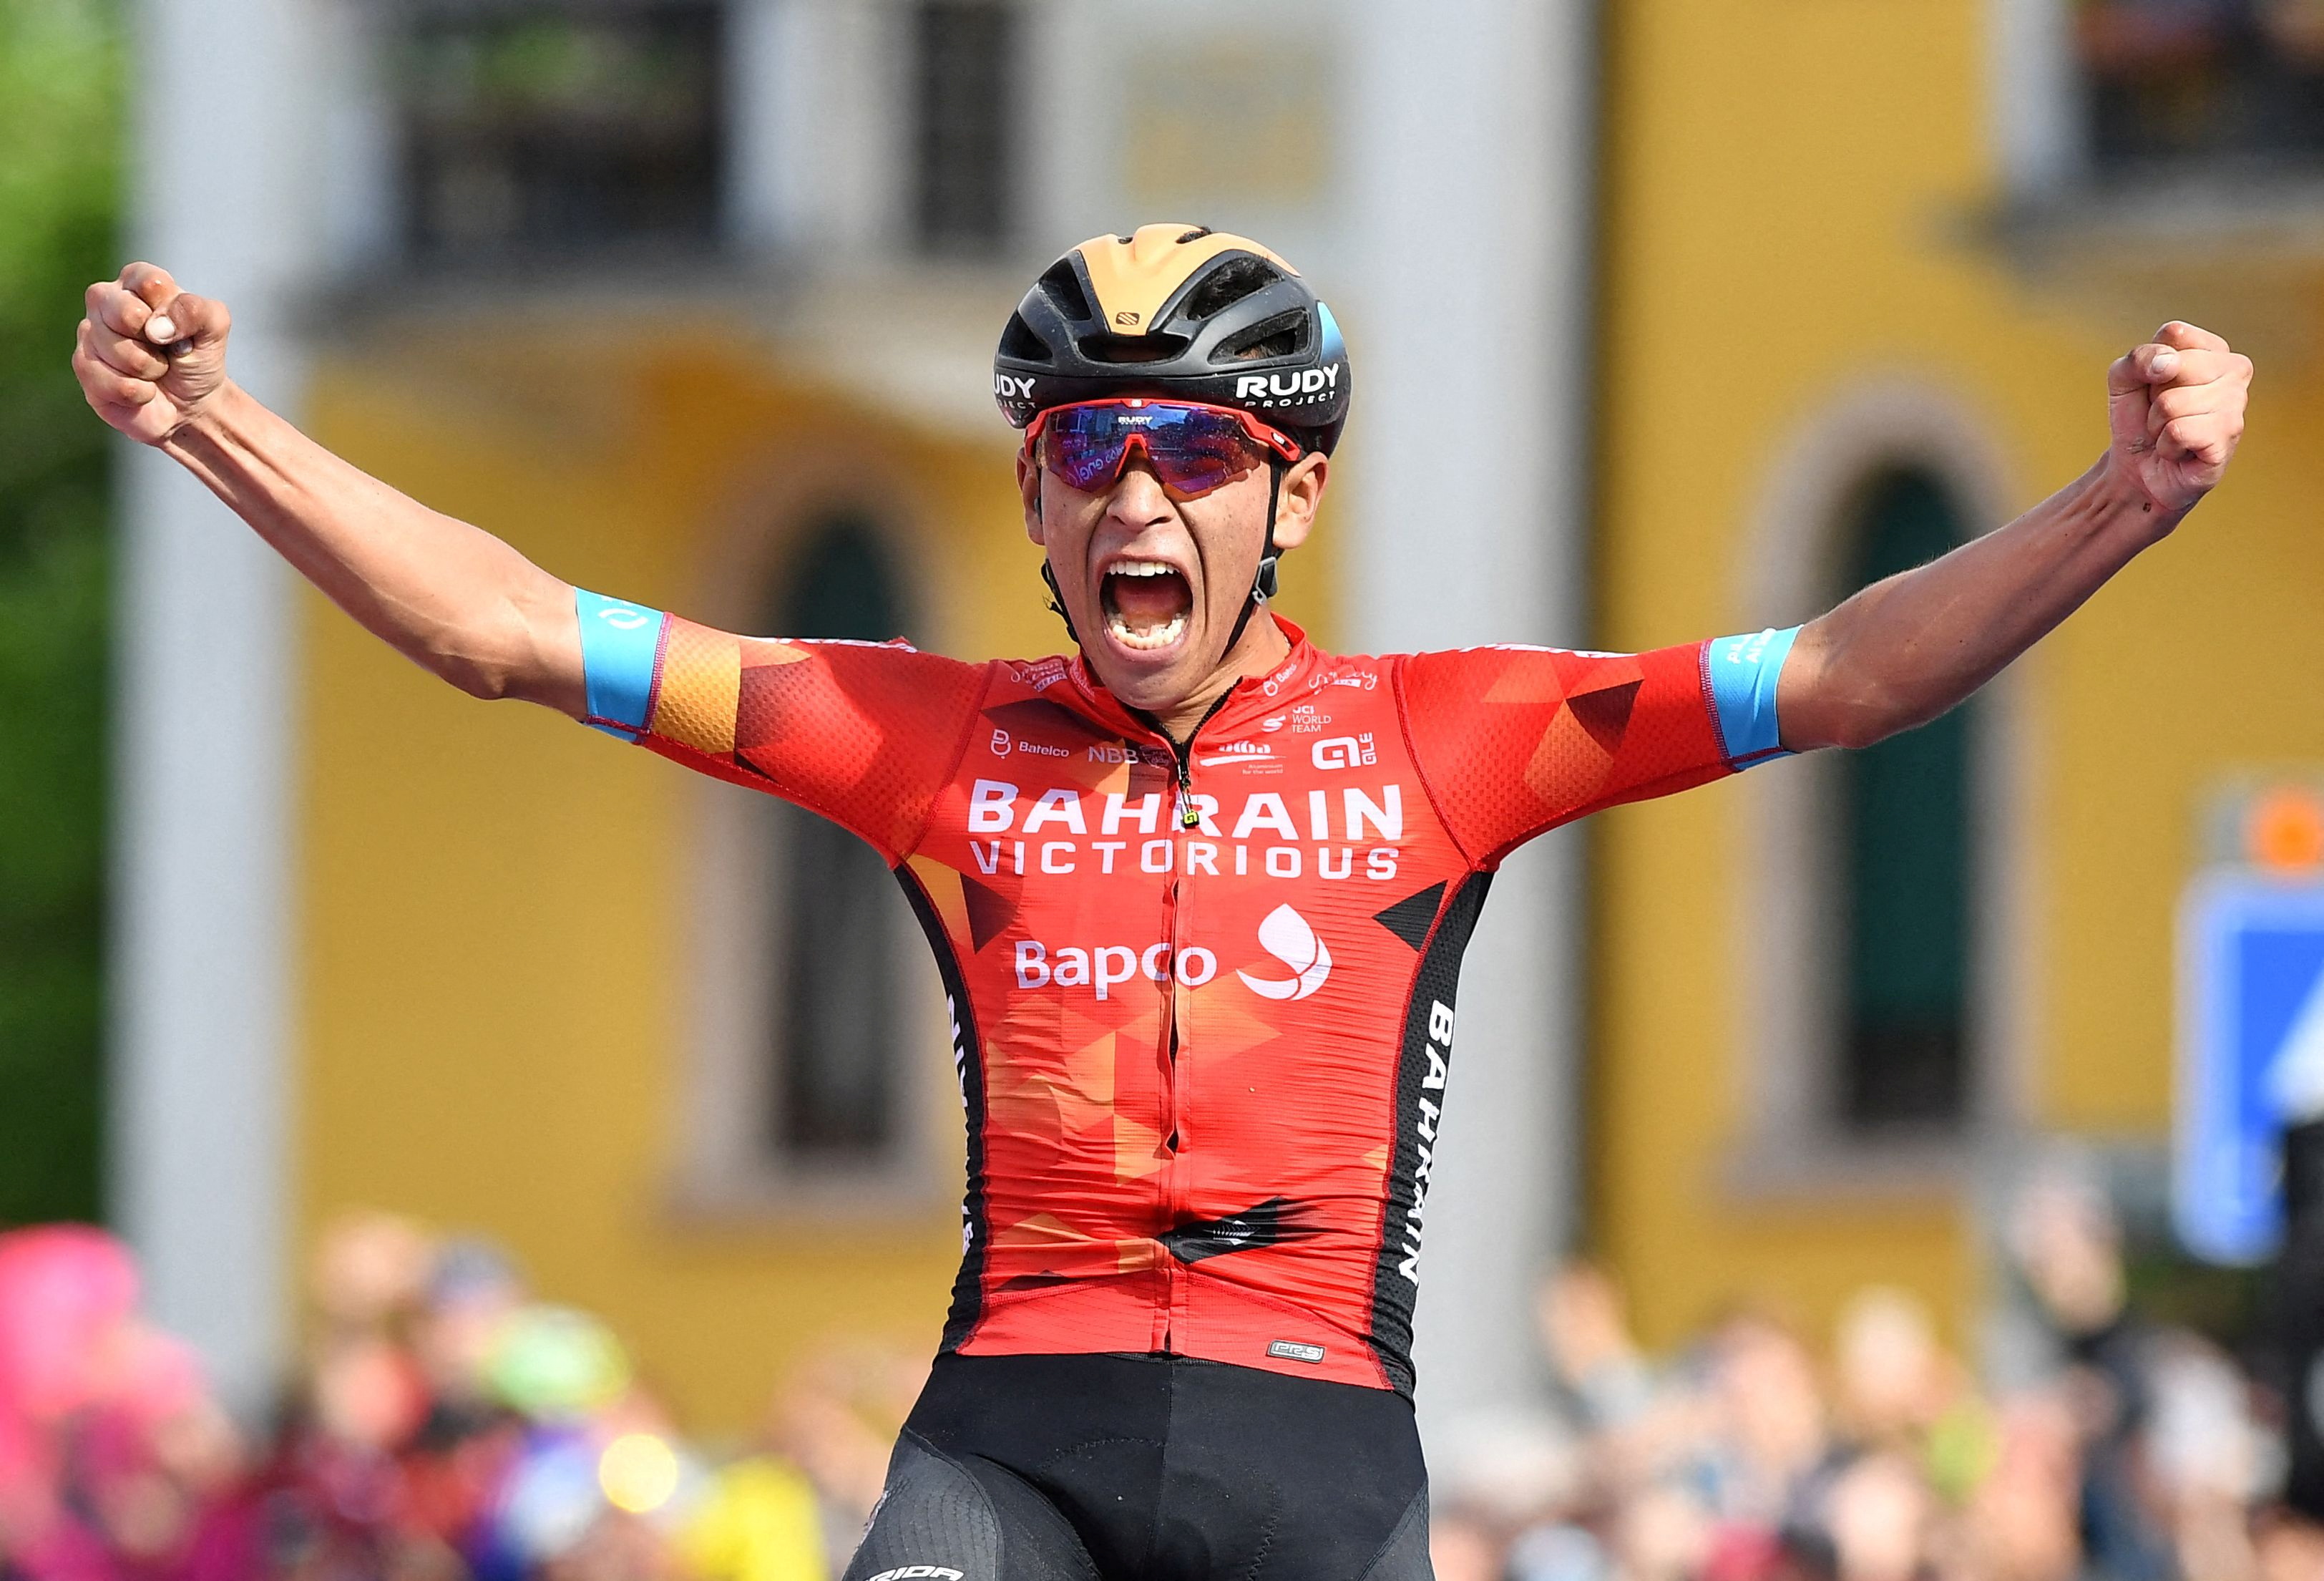 Cycling - Giro d'Italia - Stage 17 - Ponte di Legno to Lavarone, Italy - May 25, 2022 Bahrain - Victorious' Santiago Buitrago celebrates after crossing the line to win stage 17 REUTERS/Jennifer Lorenzini     TPX IMAGES OF THE DAY